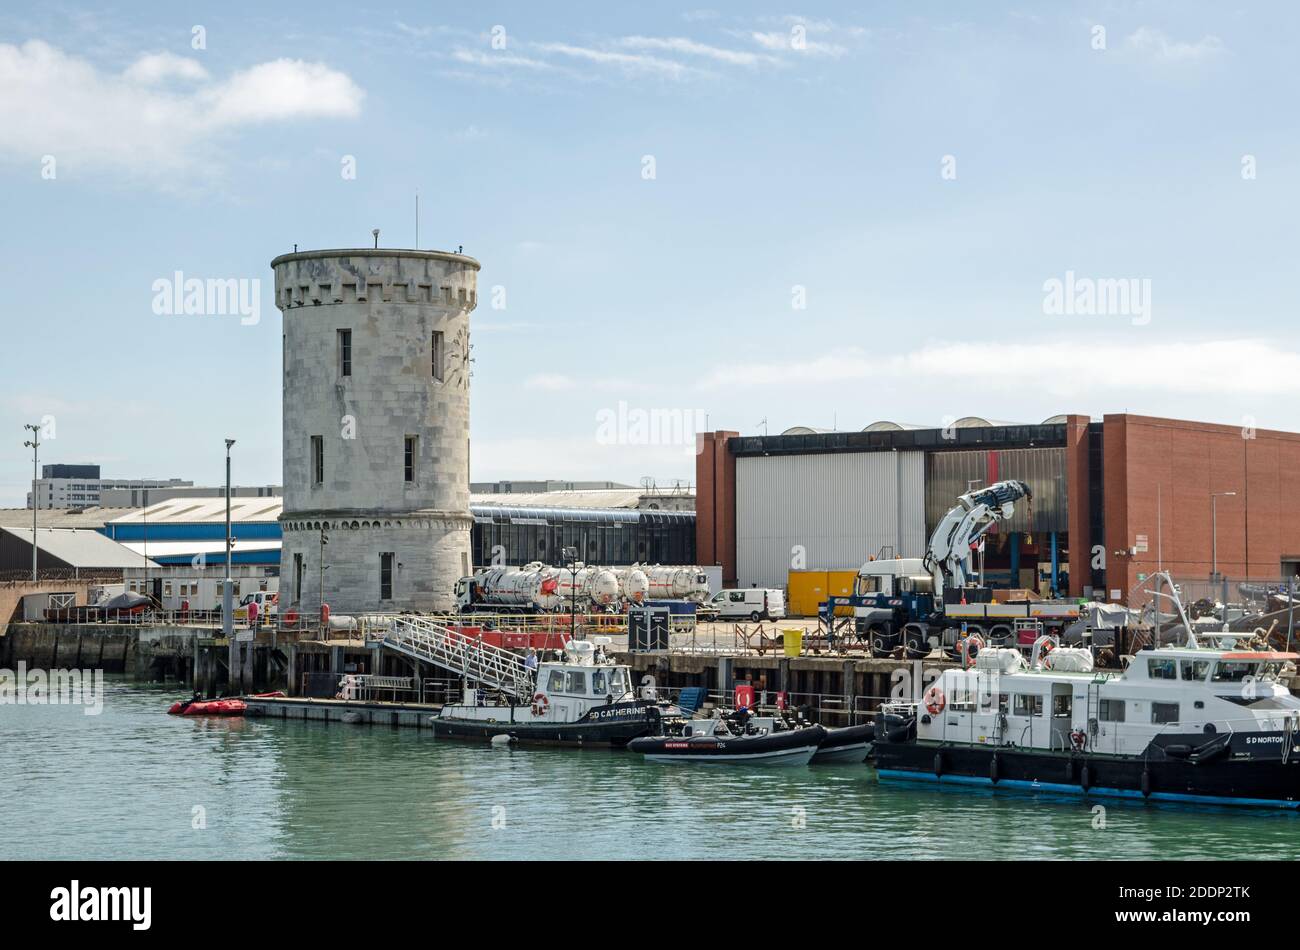 Portsmouth, UK - September 8, 2020: Ships moored near the historic Round Tower at the Royal Navy Base in Portsmouth Harbour, Hampshire on a sunny day. Stock Photo